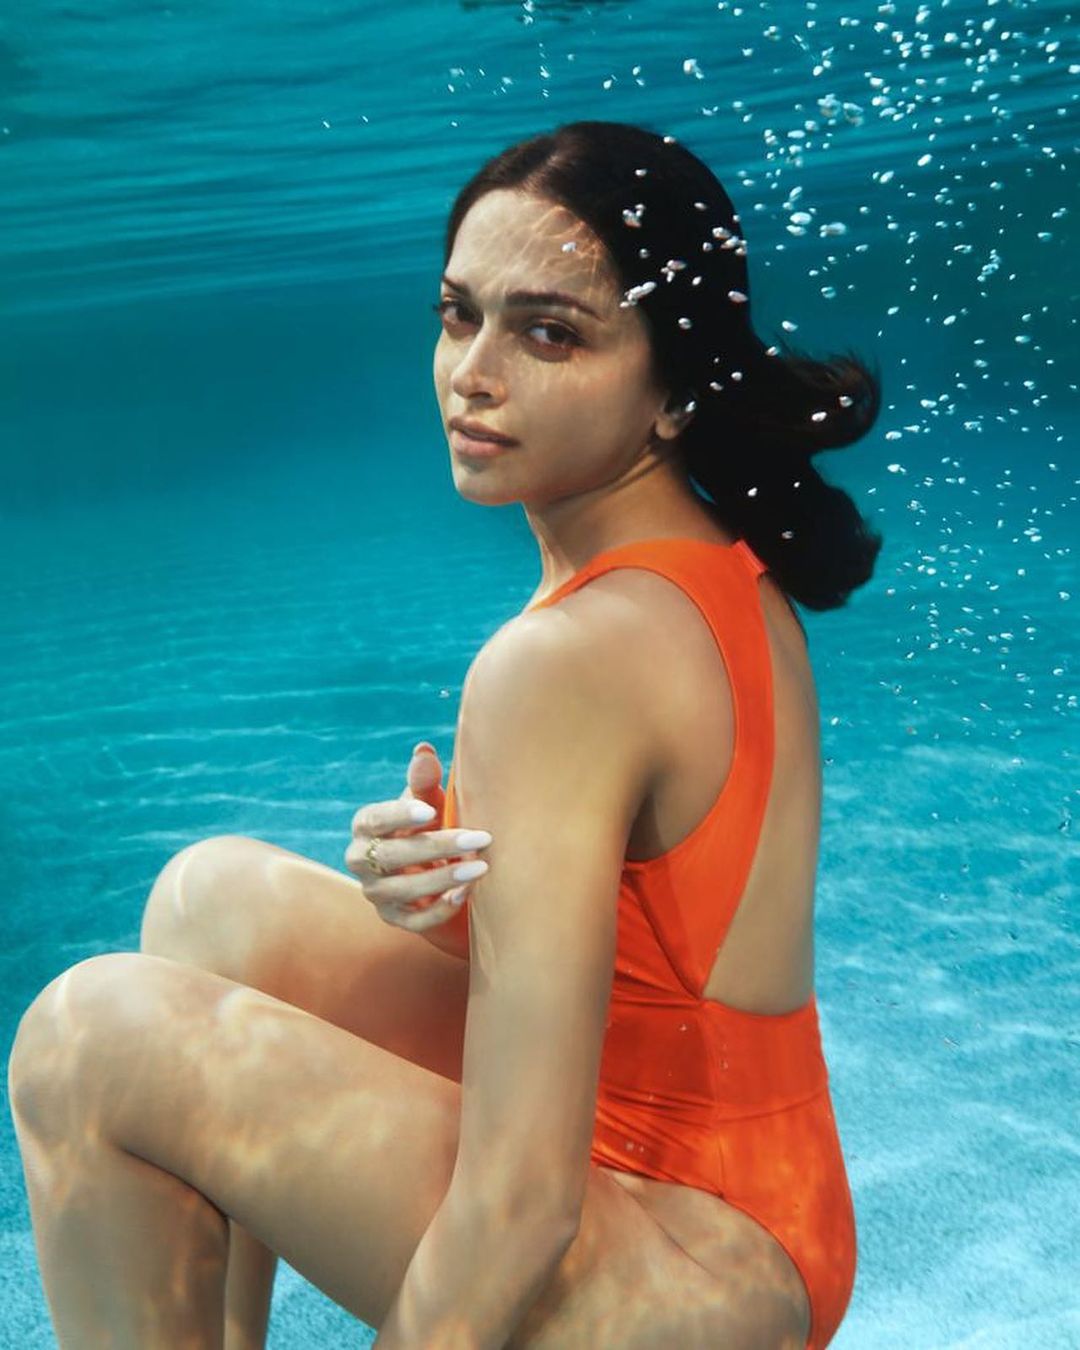 Deepika posed underwater in a bright orange swimsuit for the promotions of Gehraiyaan. (Image: Instagram)